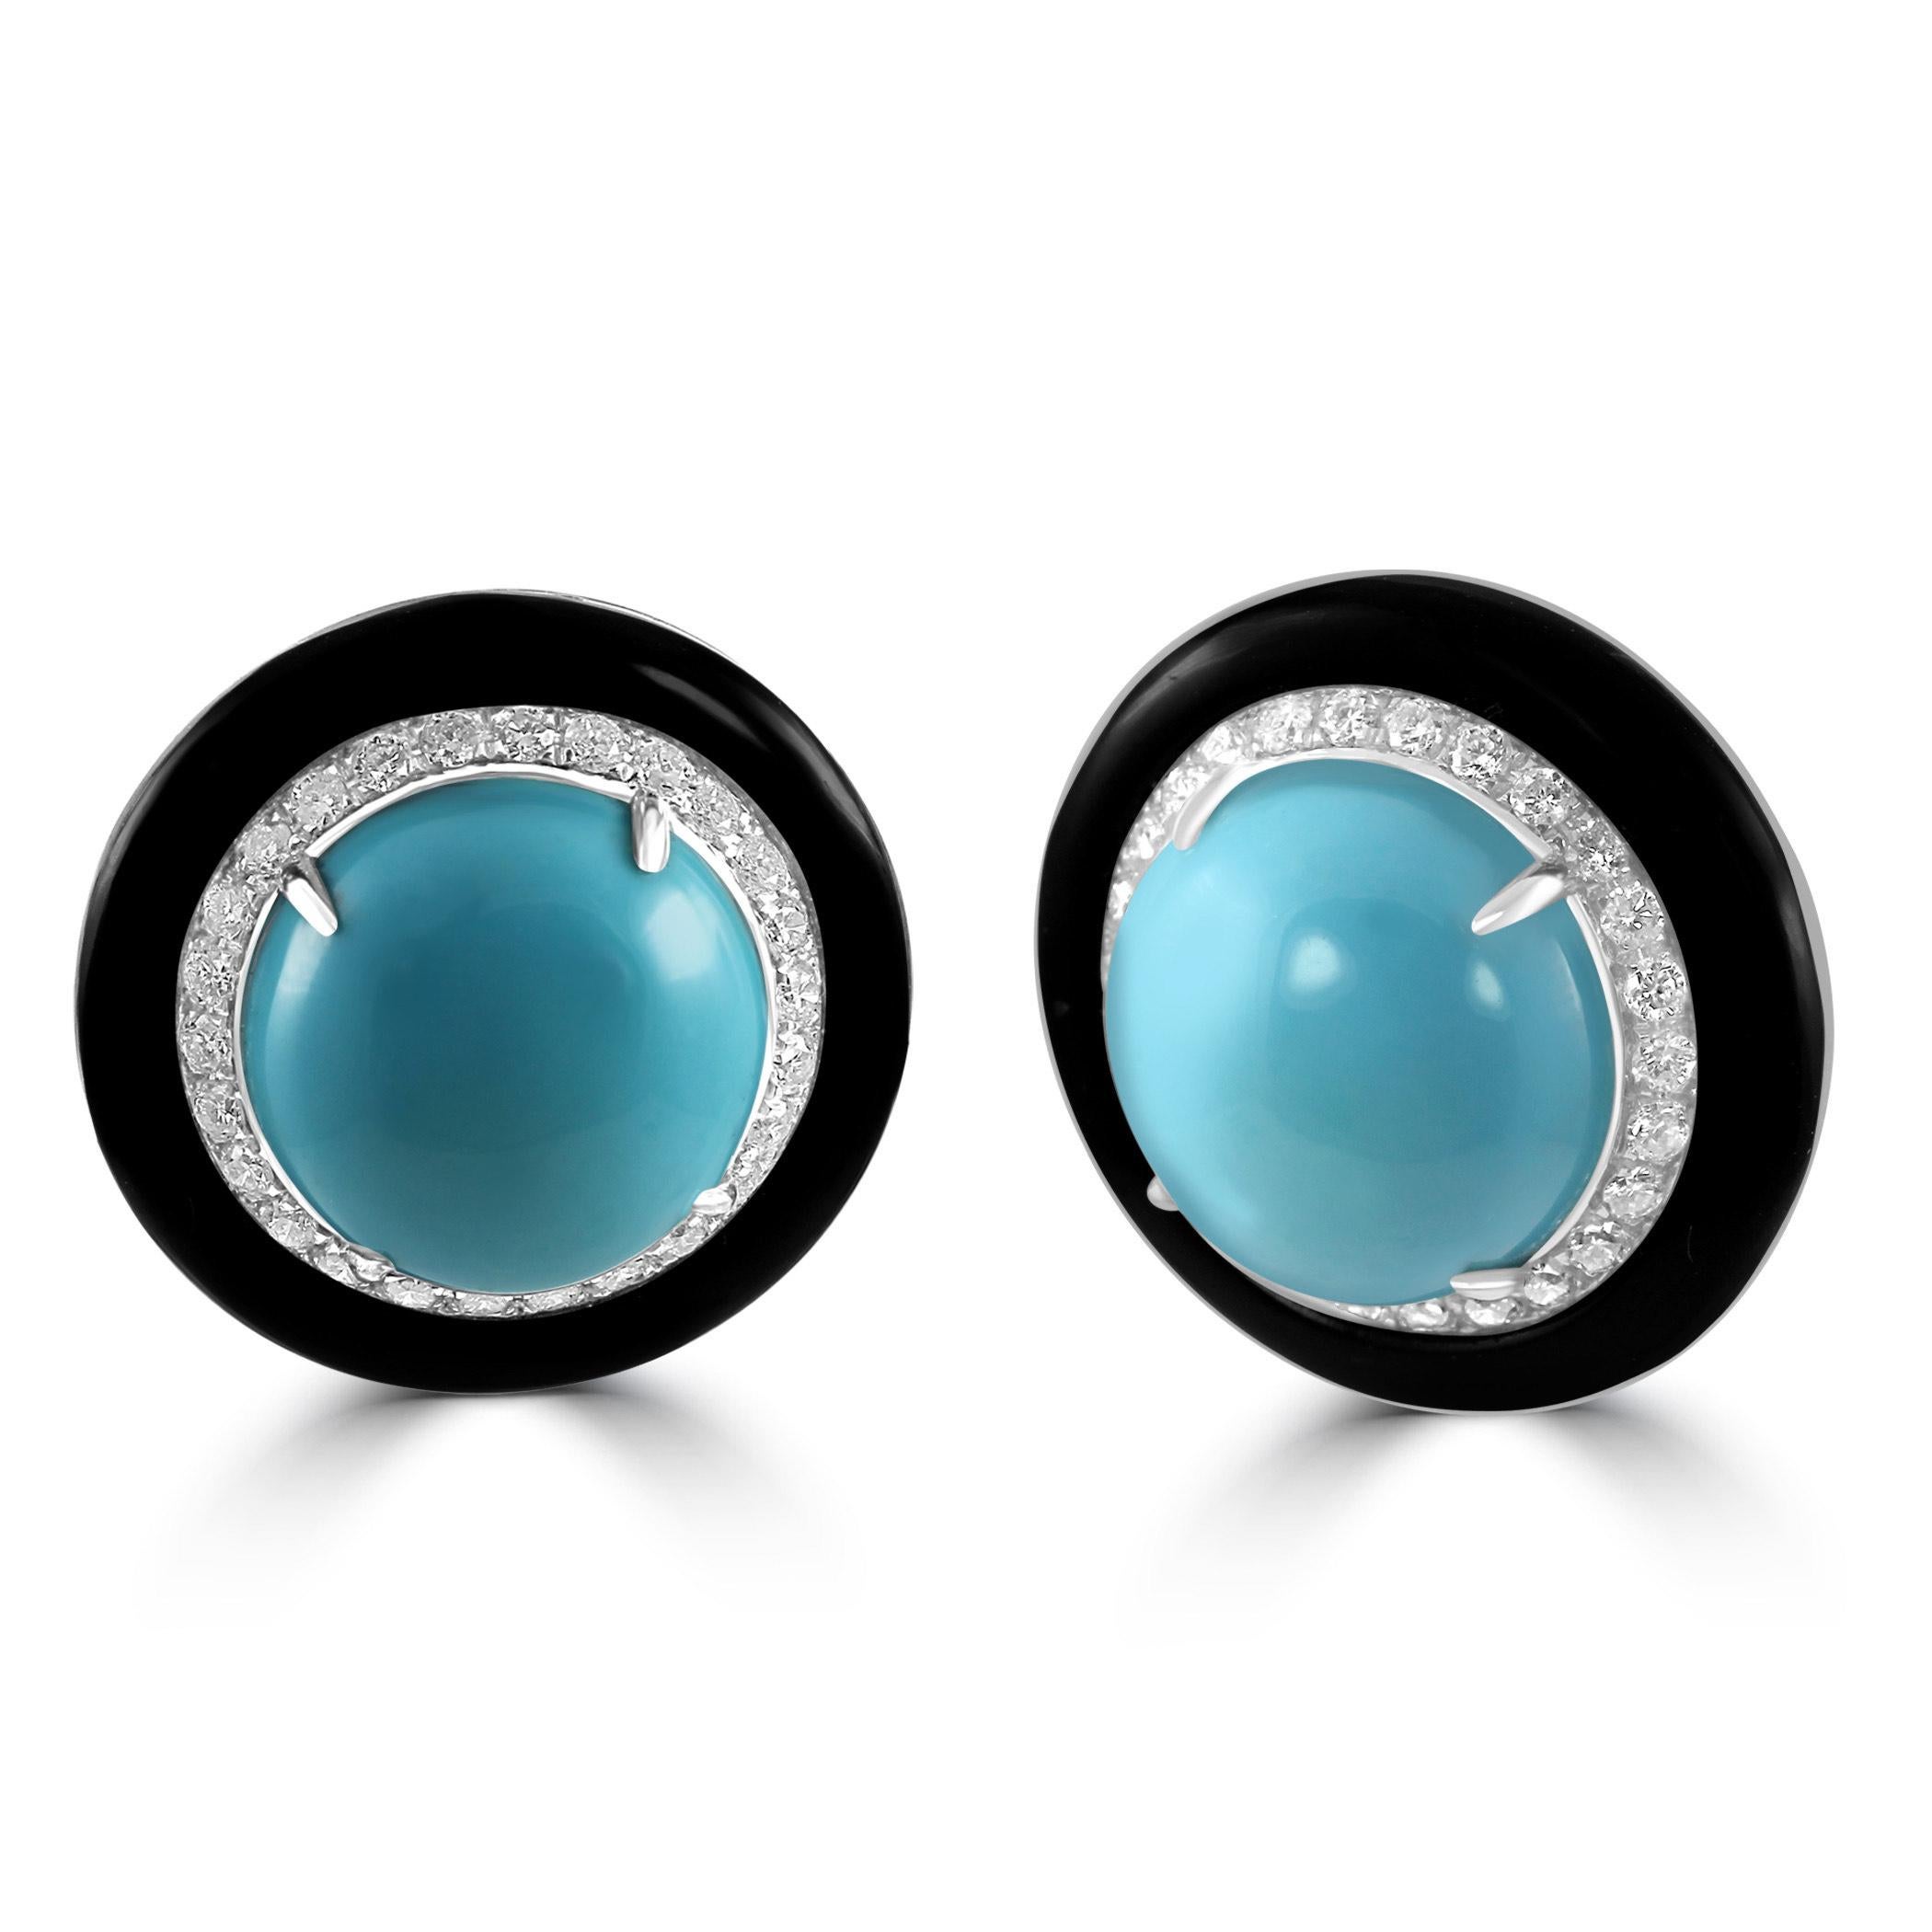 Step into a world of striking elegance with our exquisite pair of turquoise earrings. At the center of each earring lies a magnificent Turquoise, meticulously selected for its substantial size and captivating blue-green hues. With a combined weight